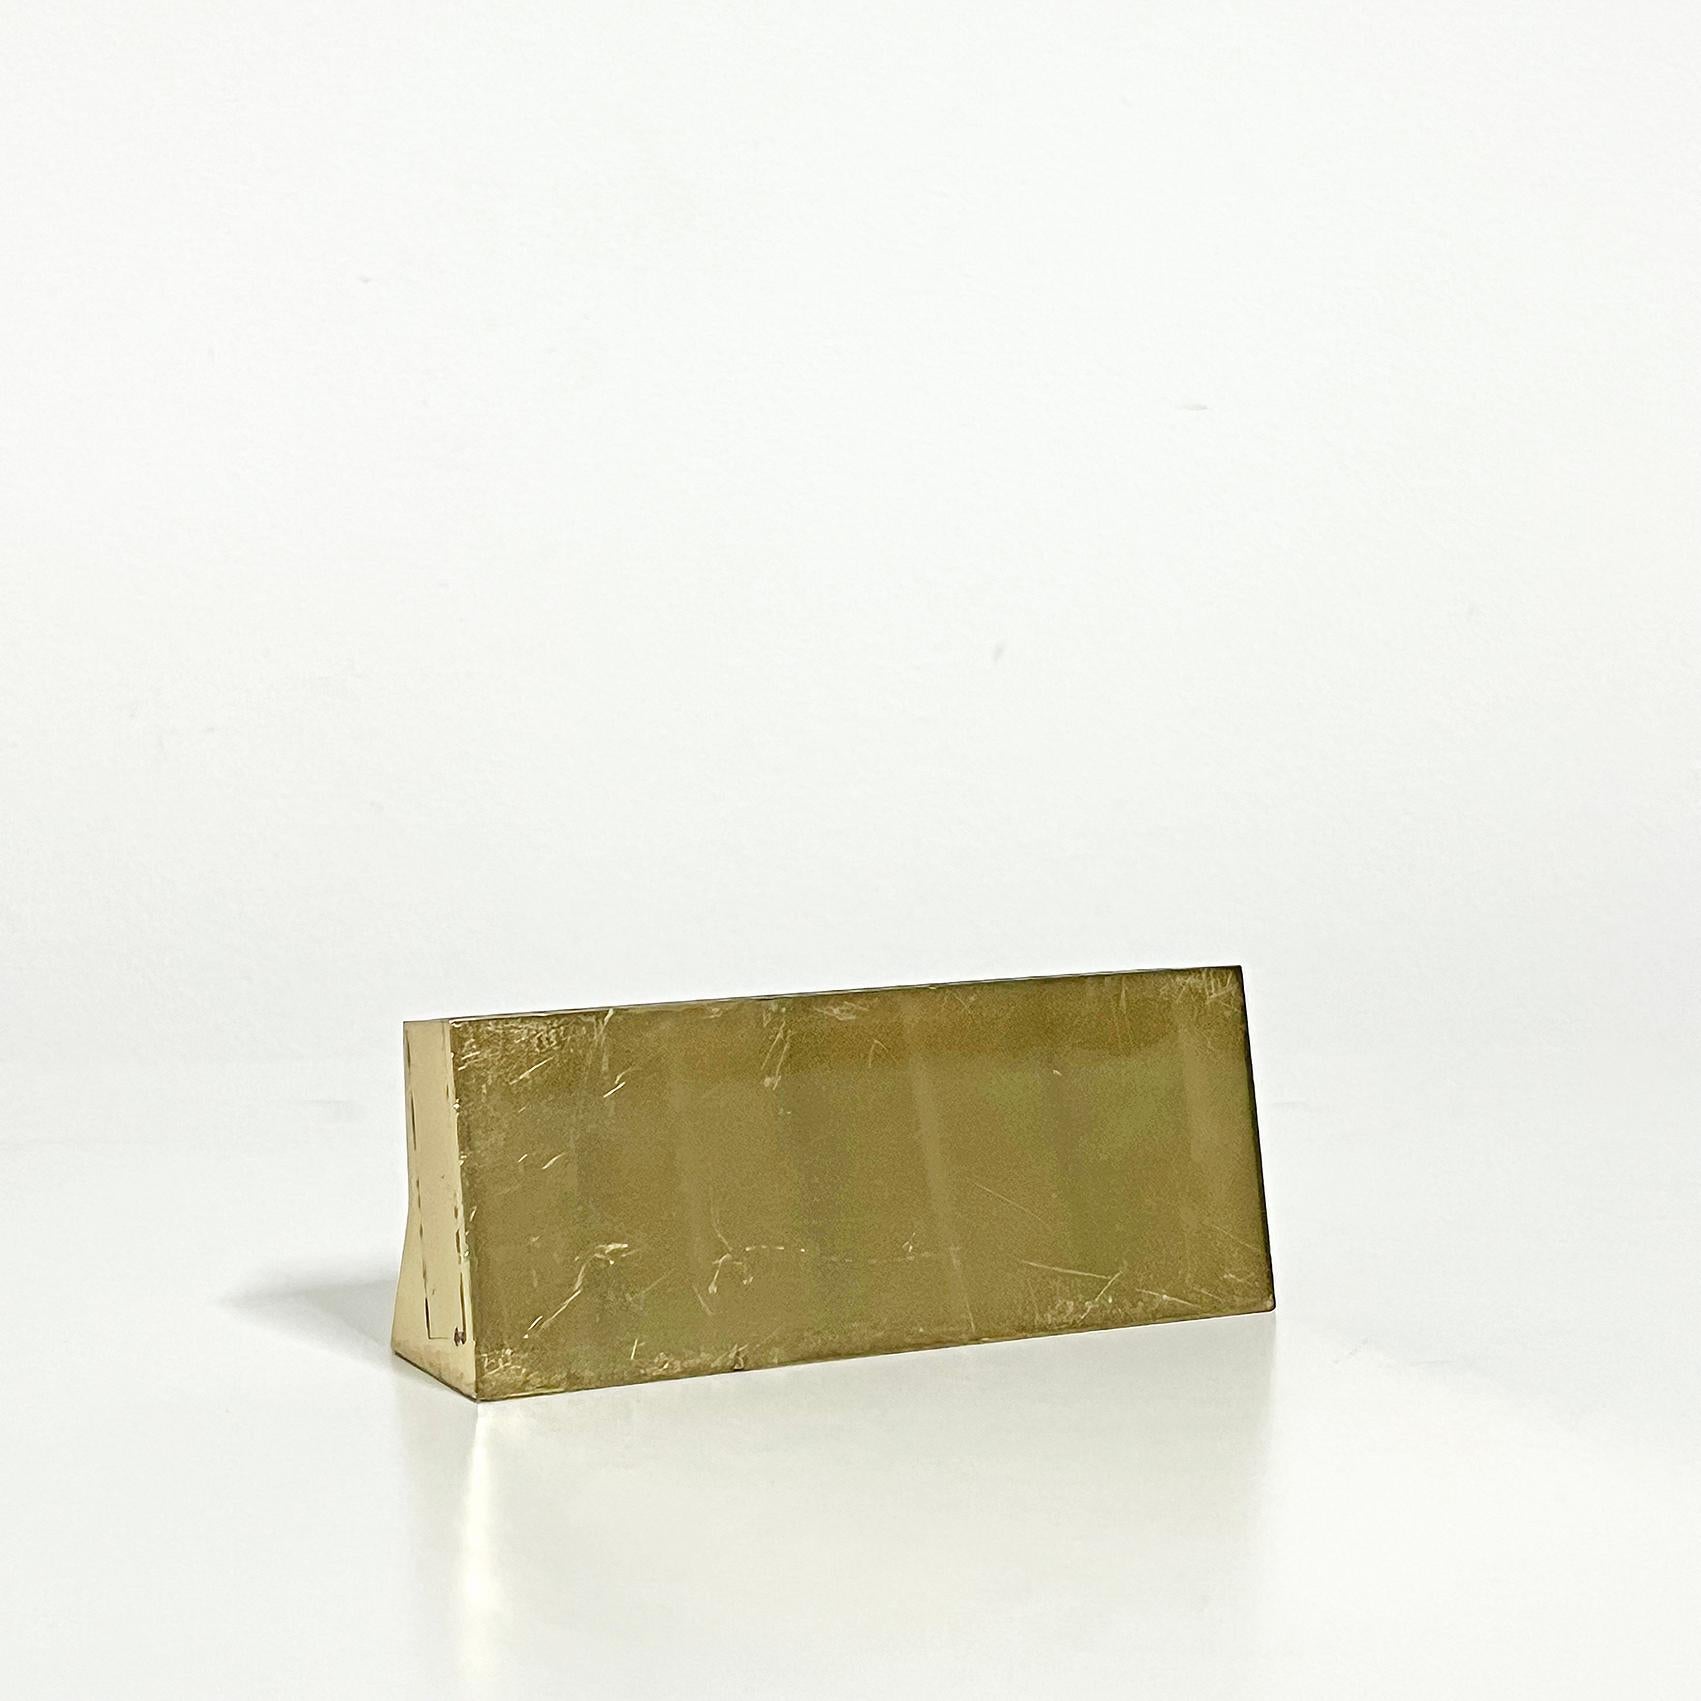 Scandinavian Modern Business Card Holder by Pierre Forsell for Skultuna In Good Condition For Sale In Örebro, SE